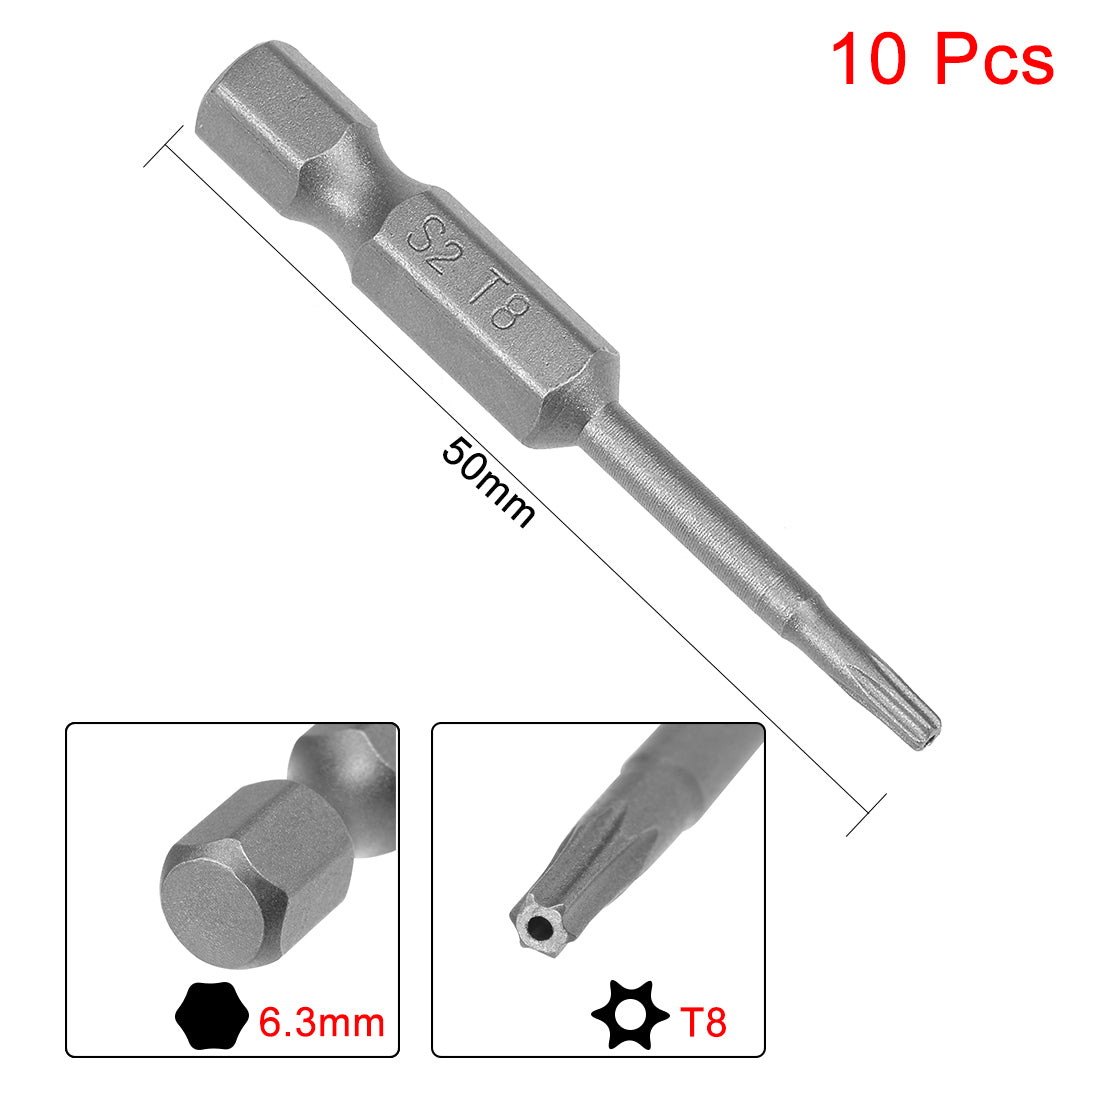 uxcell Uxcell 10pcs 50mm 1/4" Hex Shank T8 Magnetic Torx Head Security Screwdriver Bits S2